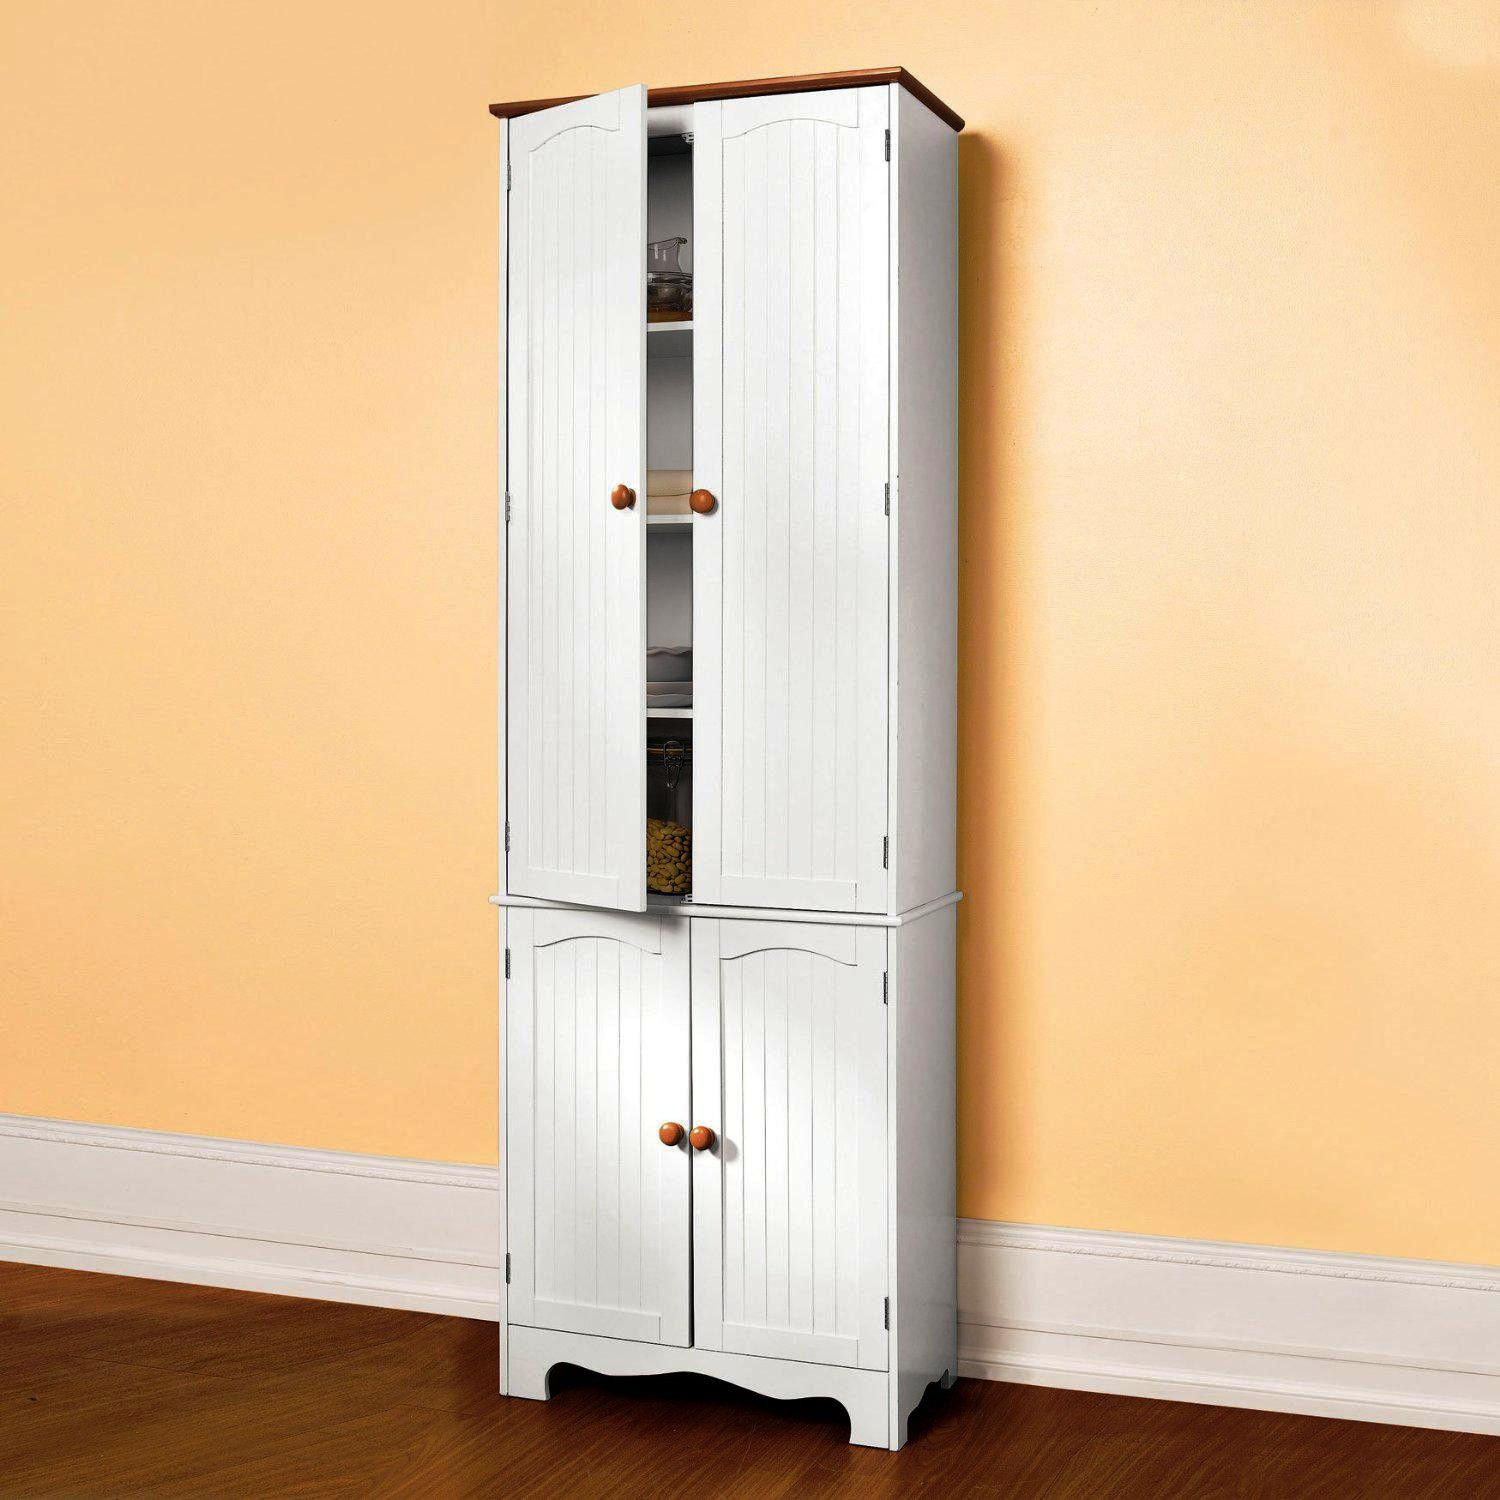 Kitchen Cabinet Organizers Lowes
 Most Popular 39 Lowe S Kitchen Cabinets Pantry Storage